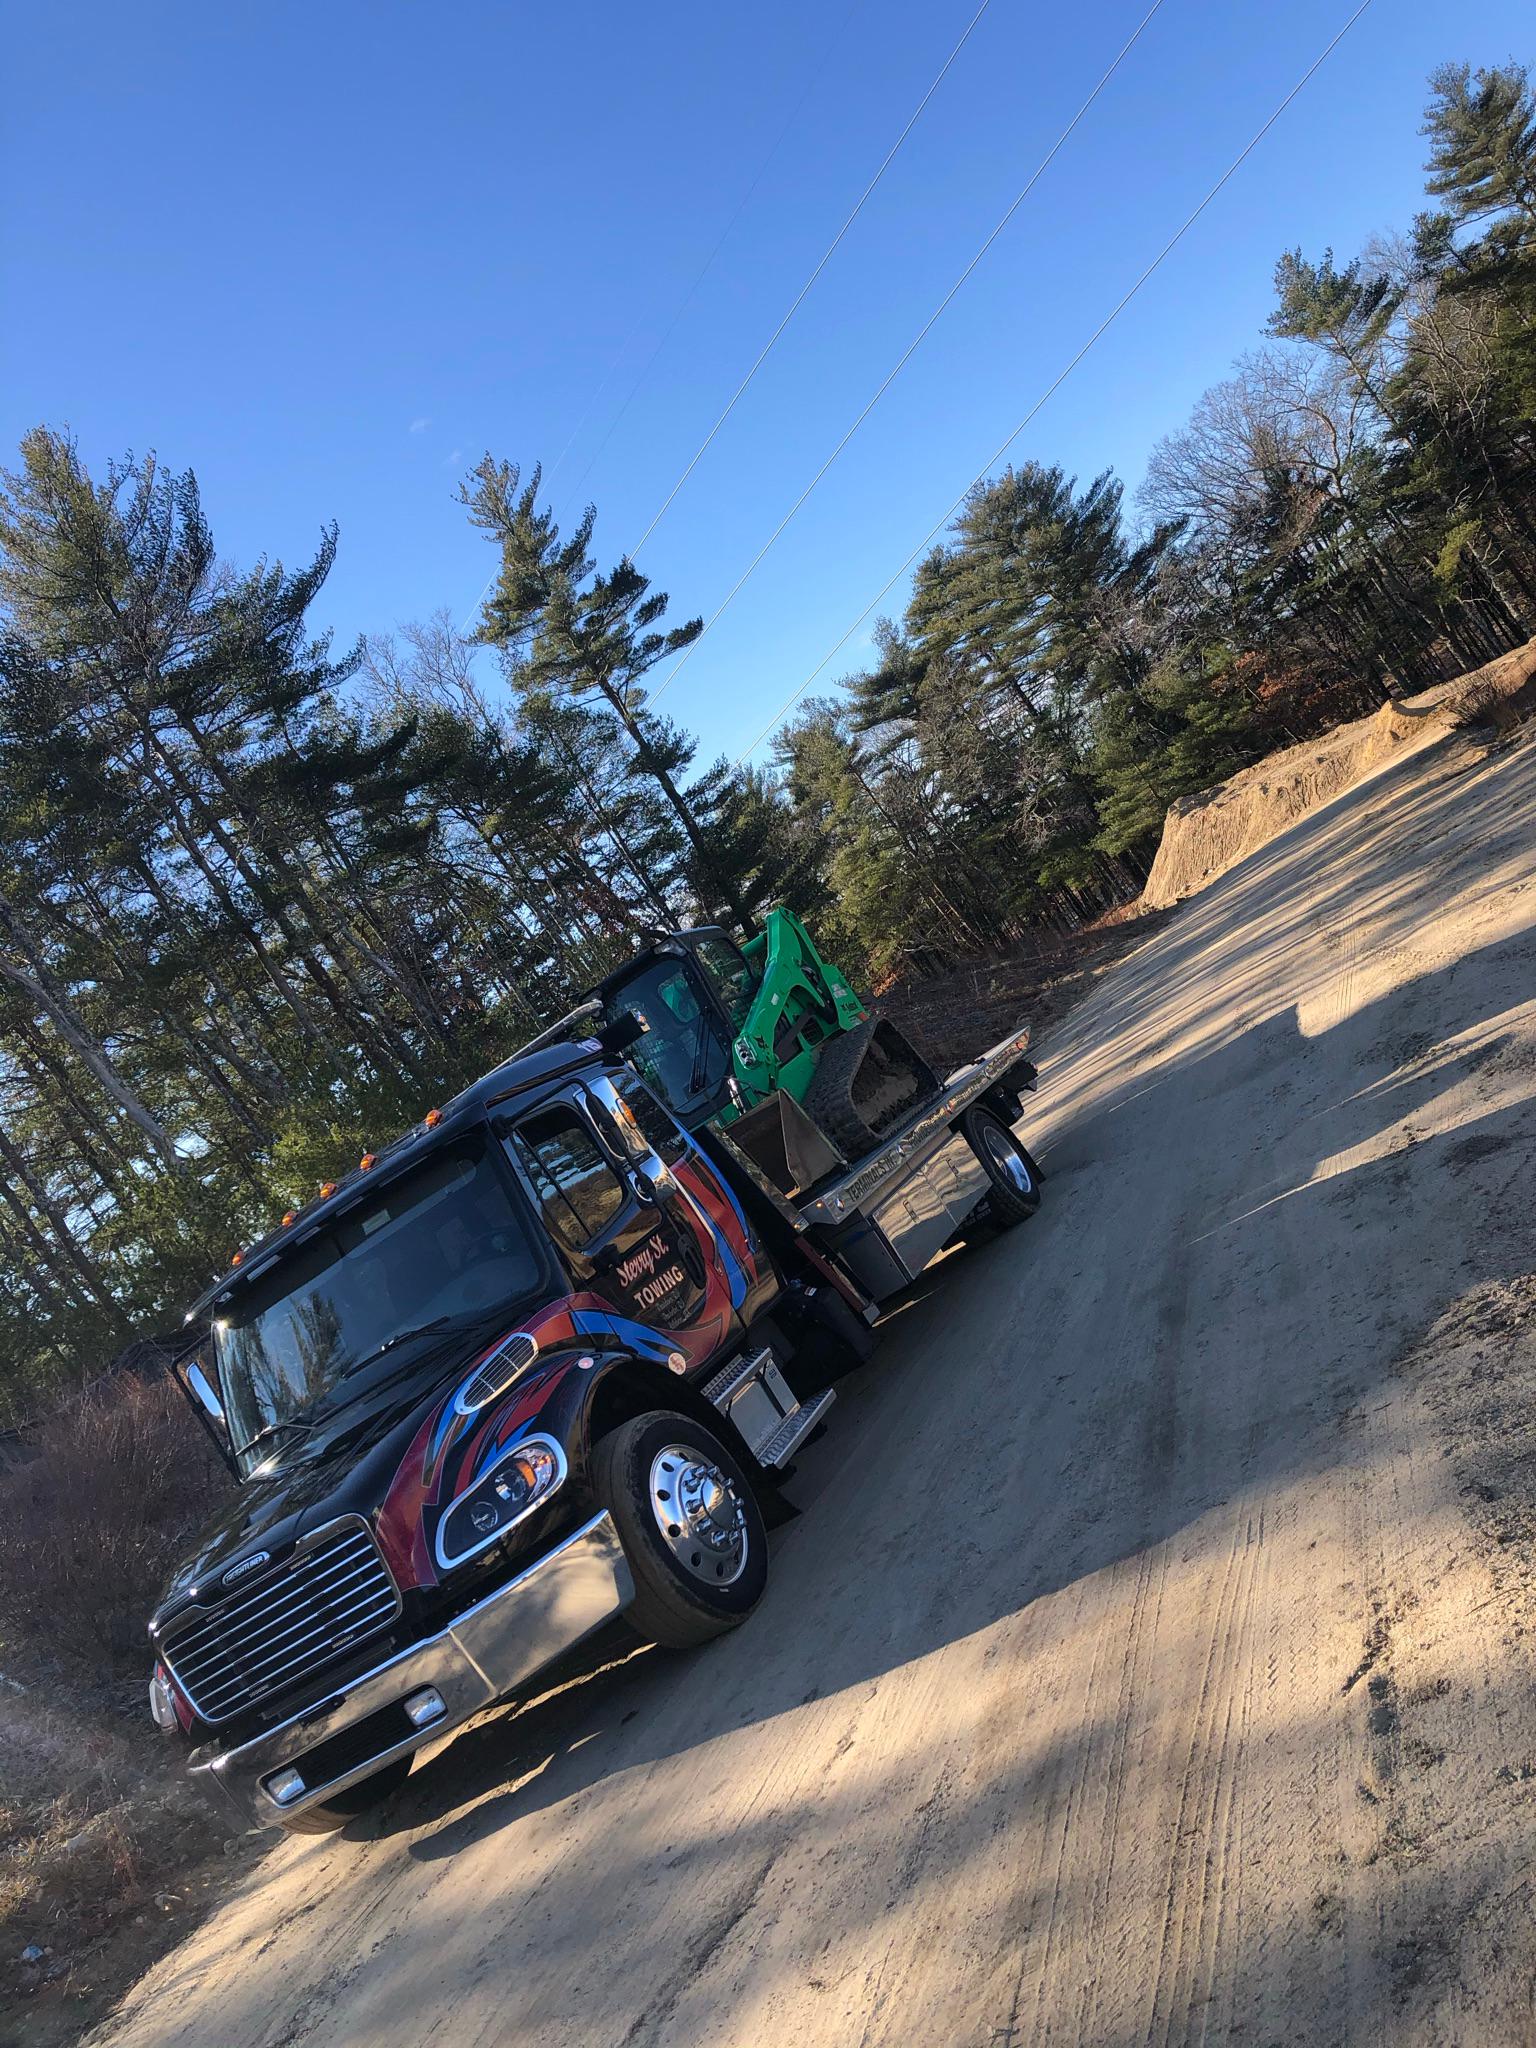 The towing company you love and trust; call now! Sterry Street Towing Attleboro (508)761-4777